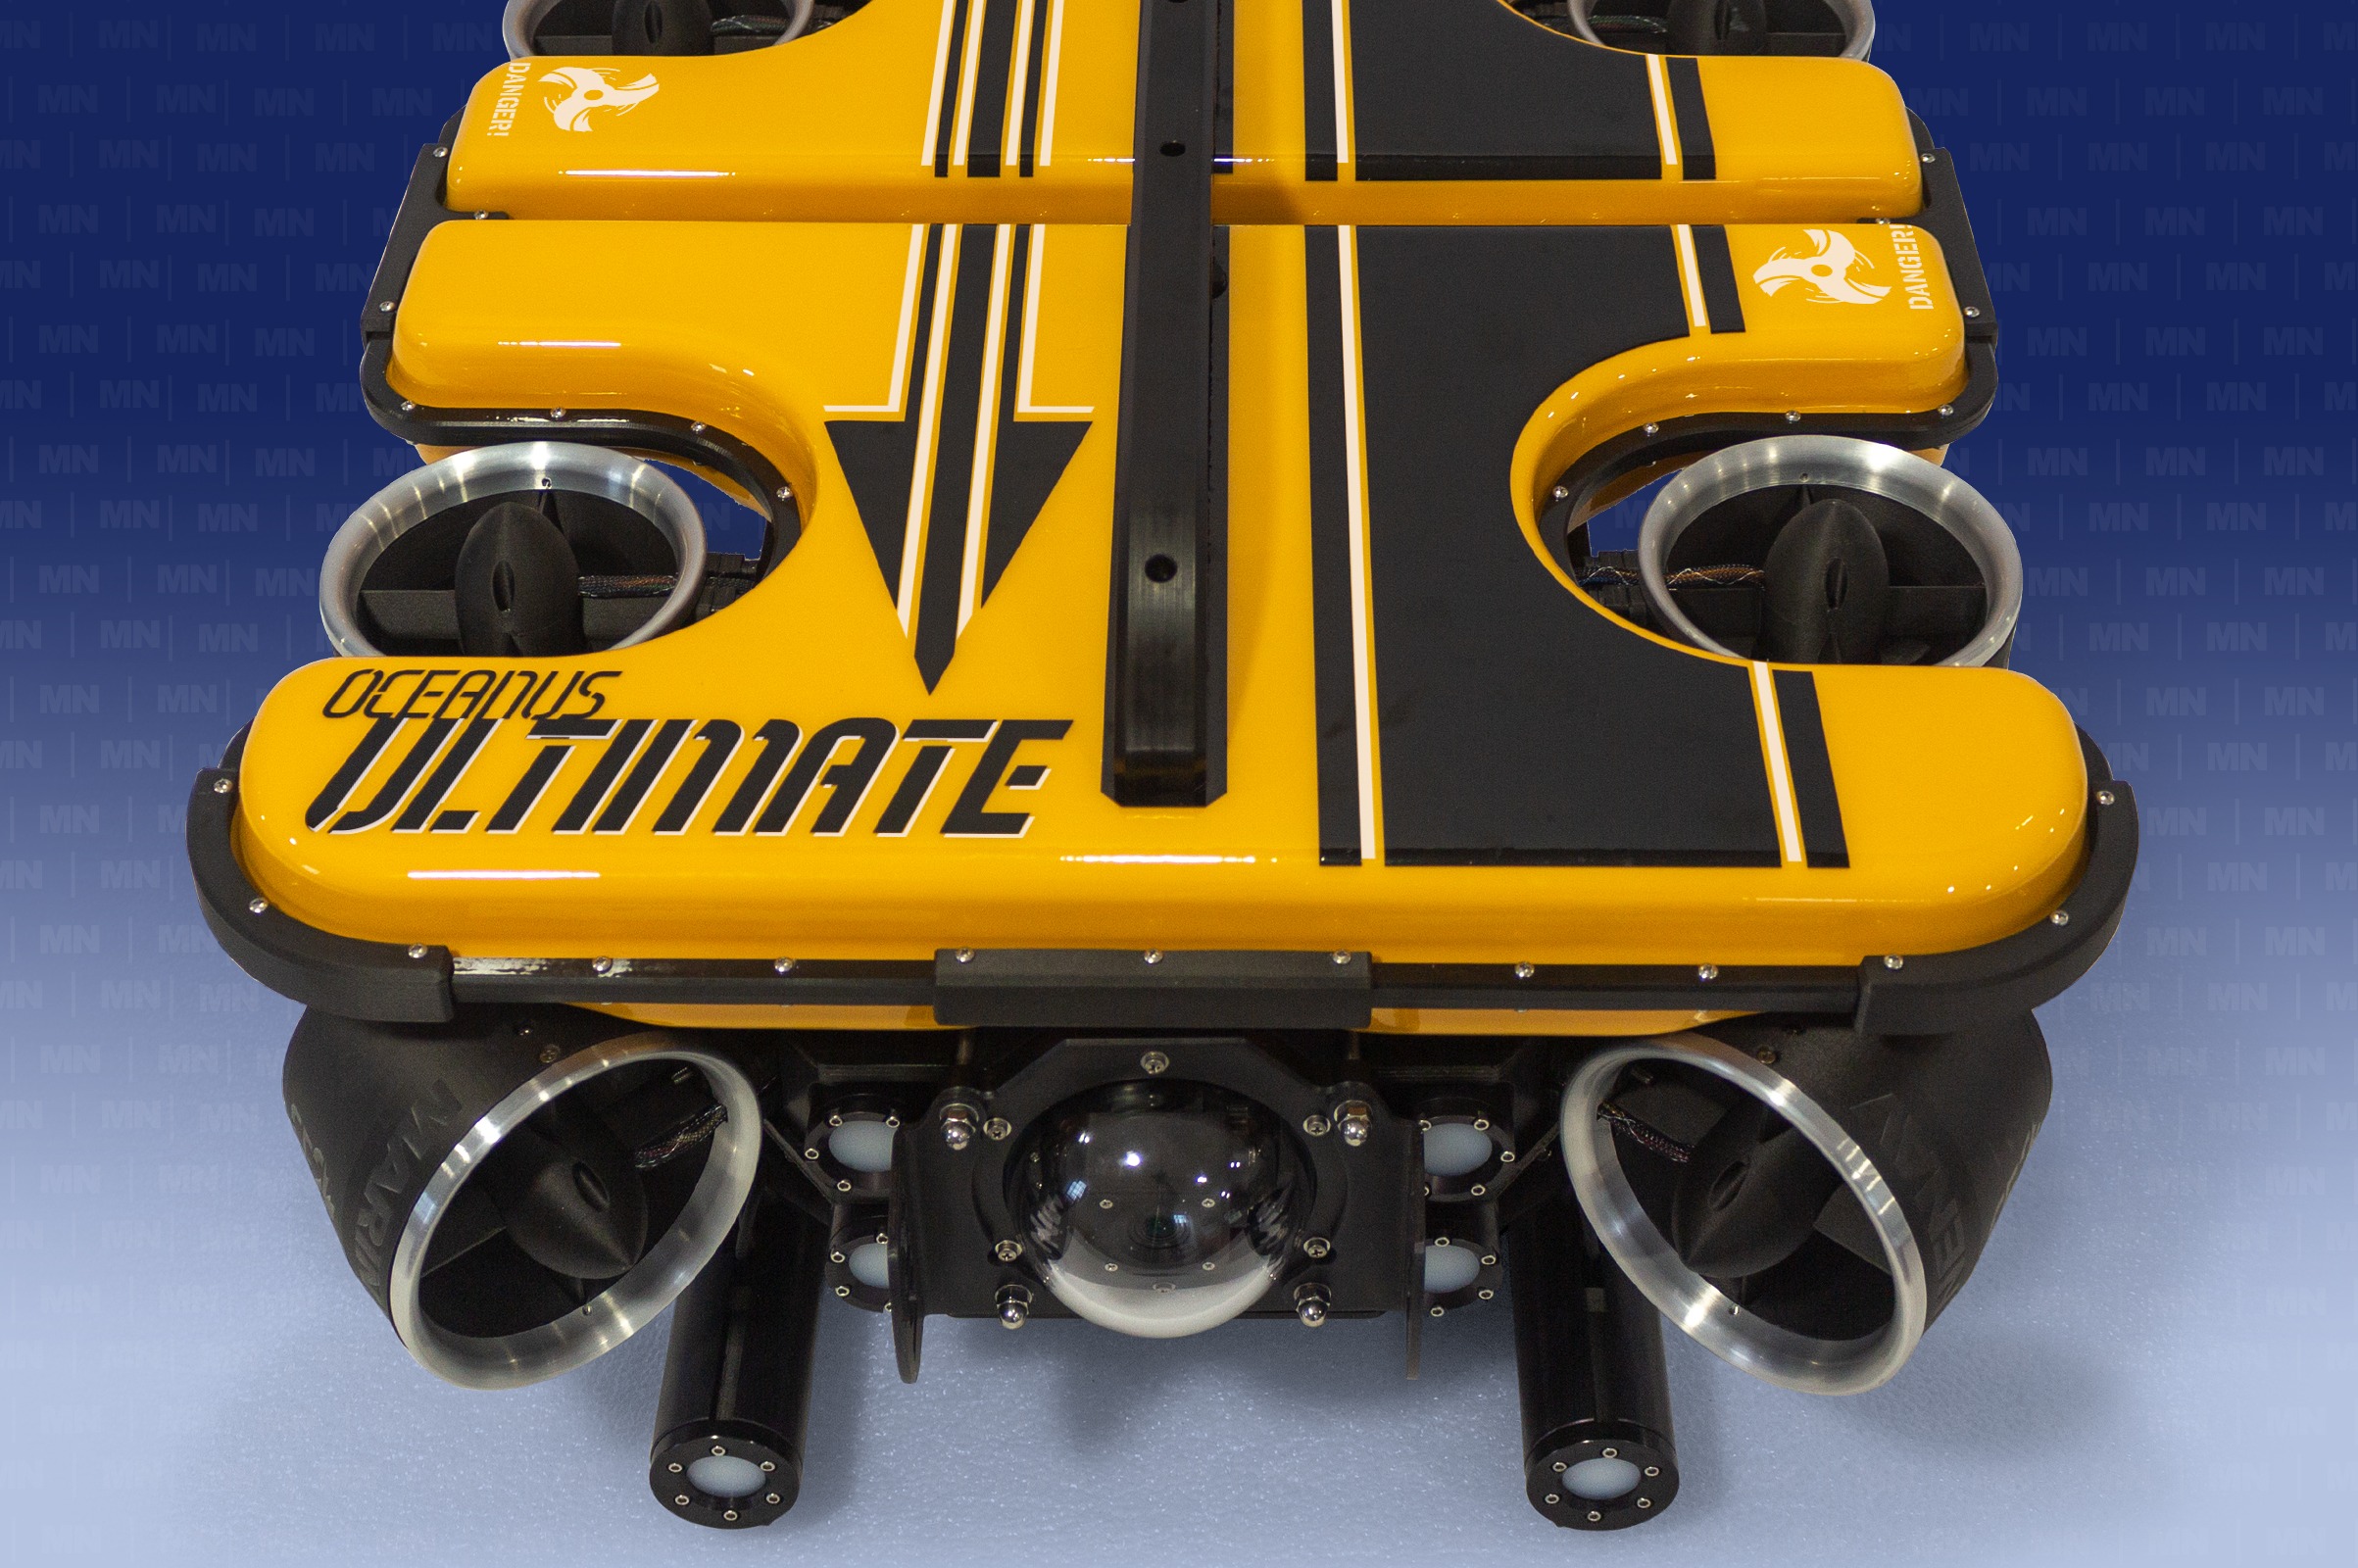 Vectorized thrusters design and powerful engines enable true lateral ROV movement